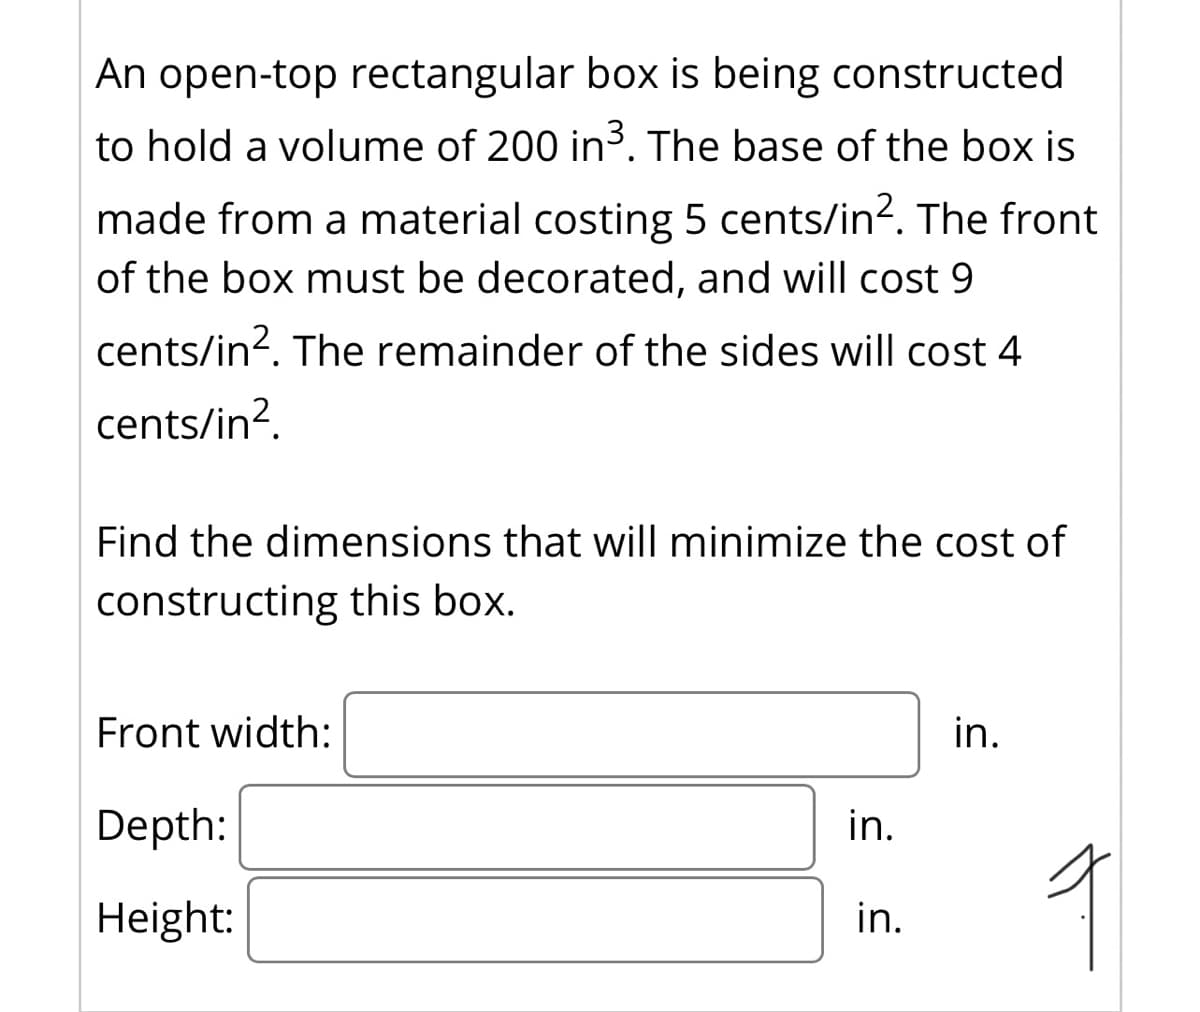 An open-top rectangular box is being constructed
to hold a volume of 200 in3. The base of the box is
made from a material costing 5 cents/in?. The front
of the box must be decorated, and will cost 9
cents/in?. The remainder of the sides will cost 4
cents/in?.
Find the dimensions that will minimize the cost of
constructing this box.
Front width:
in.
Depth:
in.
Height:
in.
